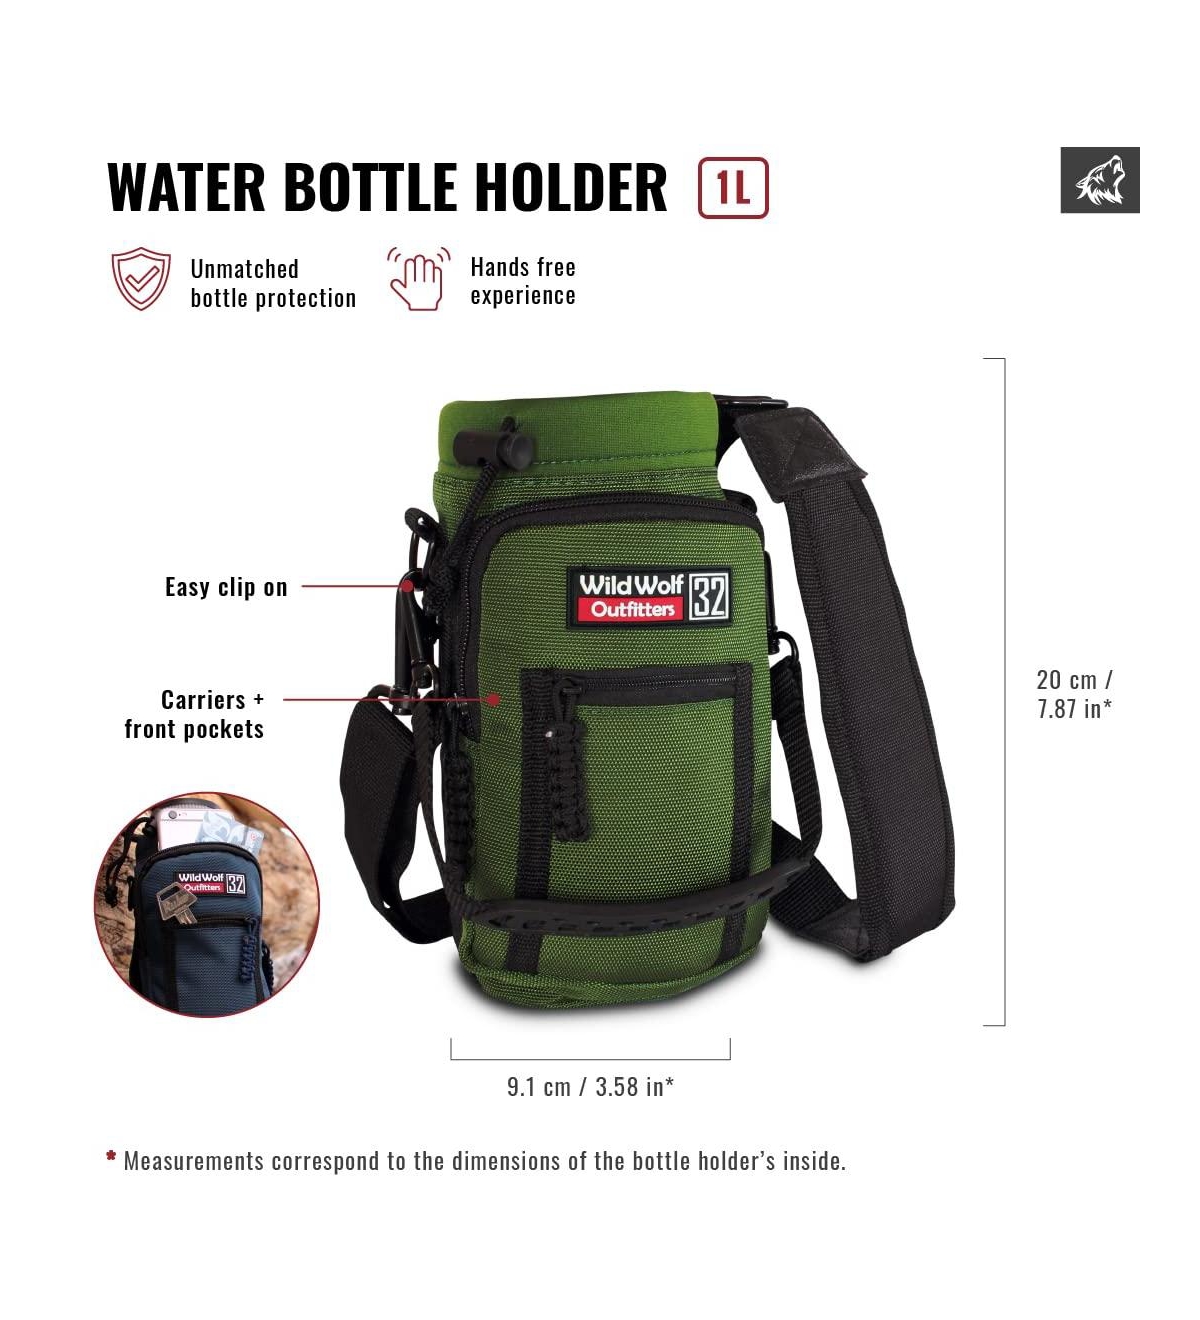 Wild Wolf Outfitters - #1 Best Water Bottle Holder for 40 oz Bottles - Carry, Protect and Insulate Your Flask with This Military Grade Carrier w/ 2